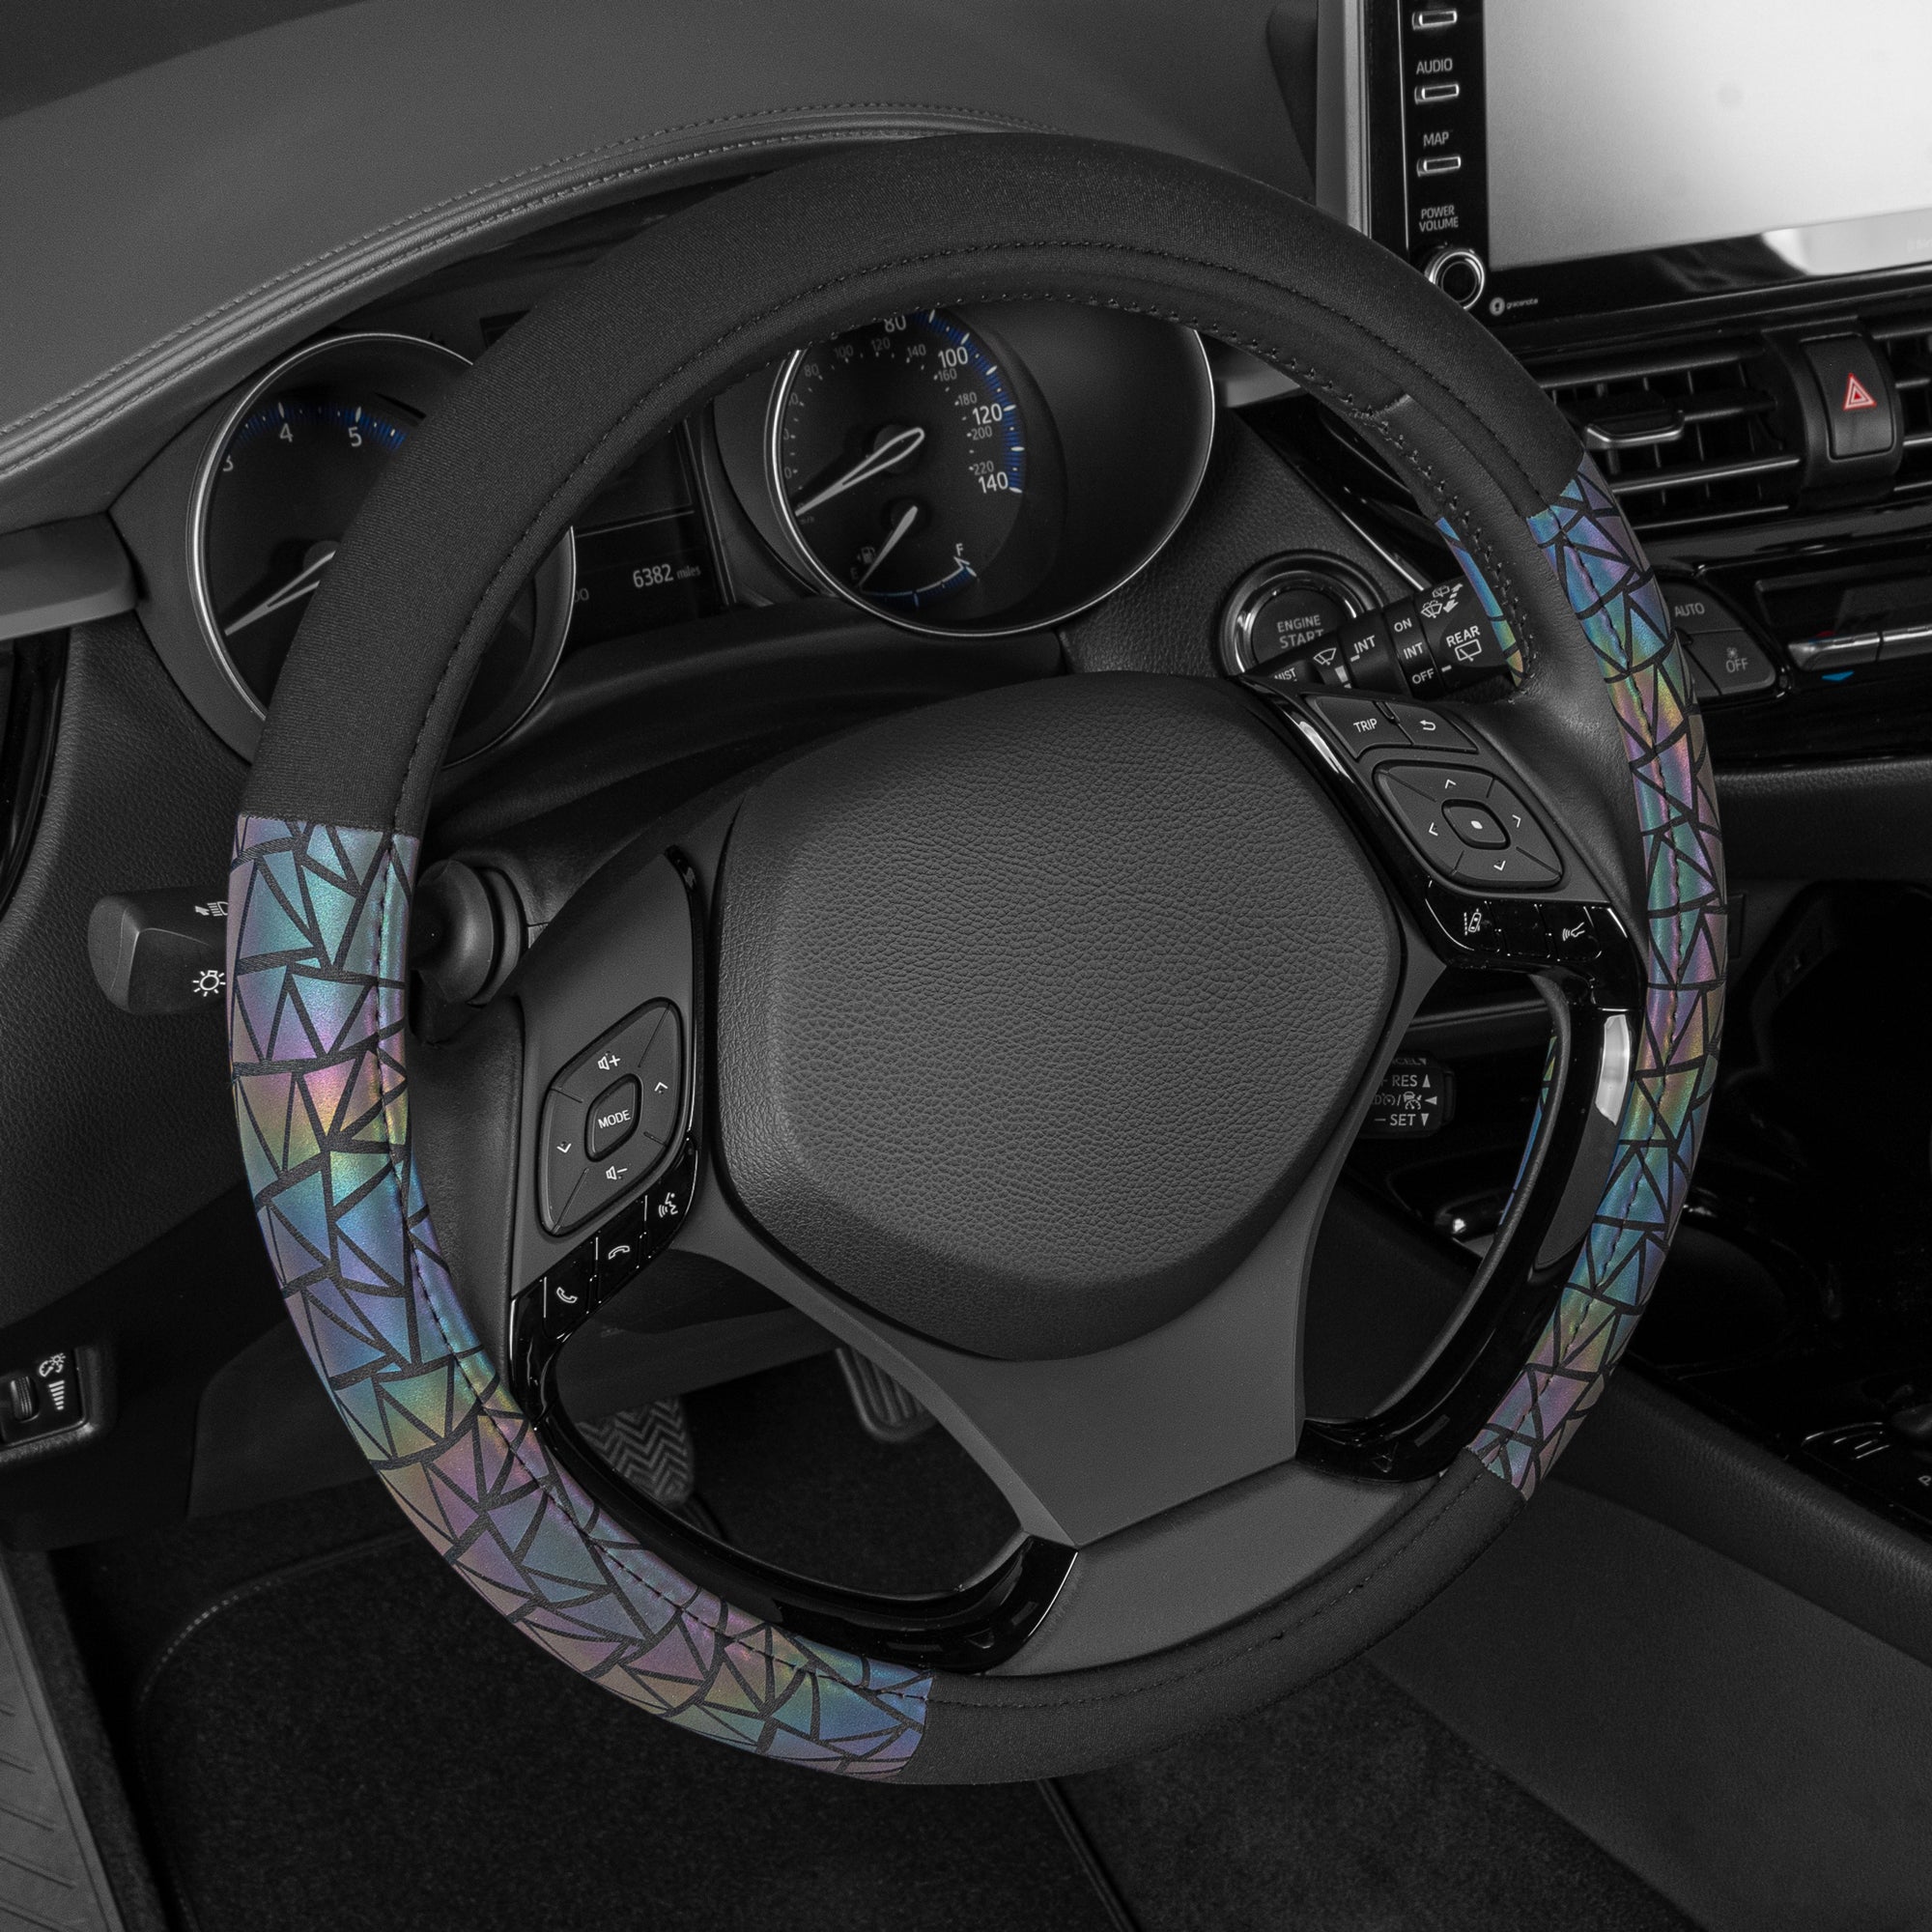 BDK Geometric Prism Sparkle Glitter Steering Wheel Cover - Car Steering Wheel Cover for Women with Shiny Holo Bling Accents, Fits Most Car Truck Van SUV Wheel Sizes 14.5 to 15 inch